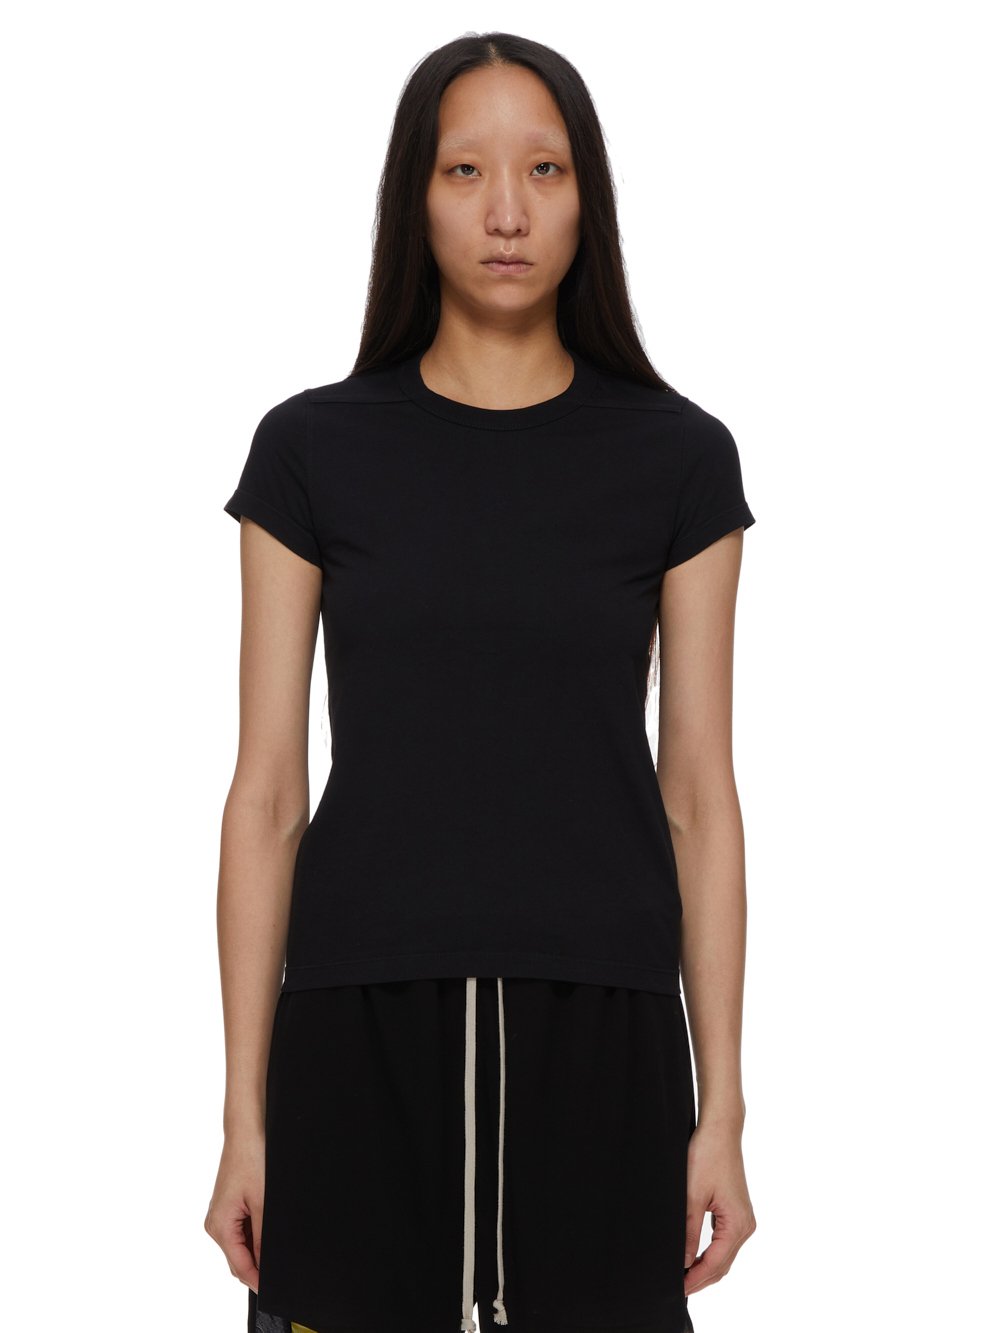 RICK OWENS FW23 LUXOR CROPPED LEVEL T IN BLACK CLASSIC COTTON JERSEY